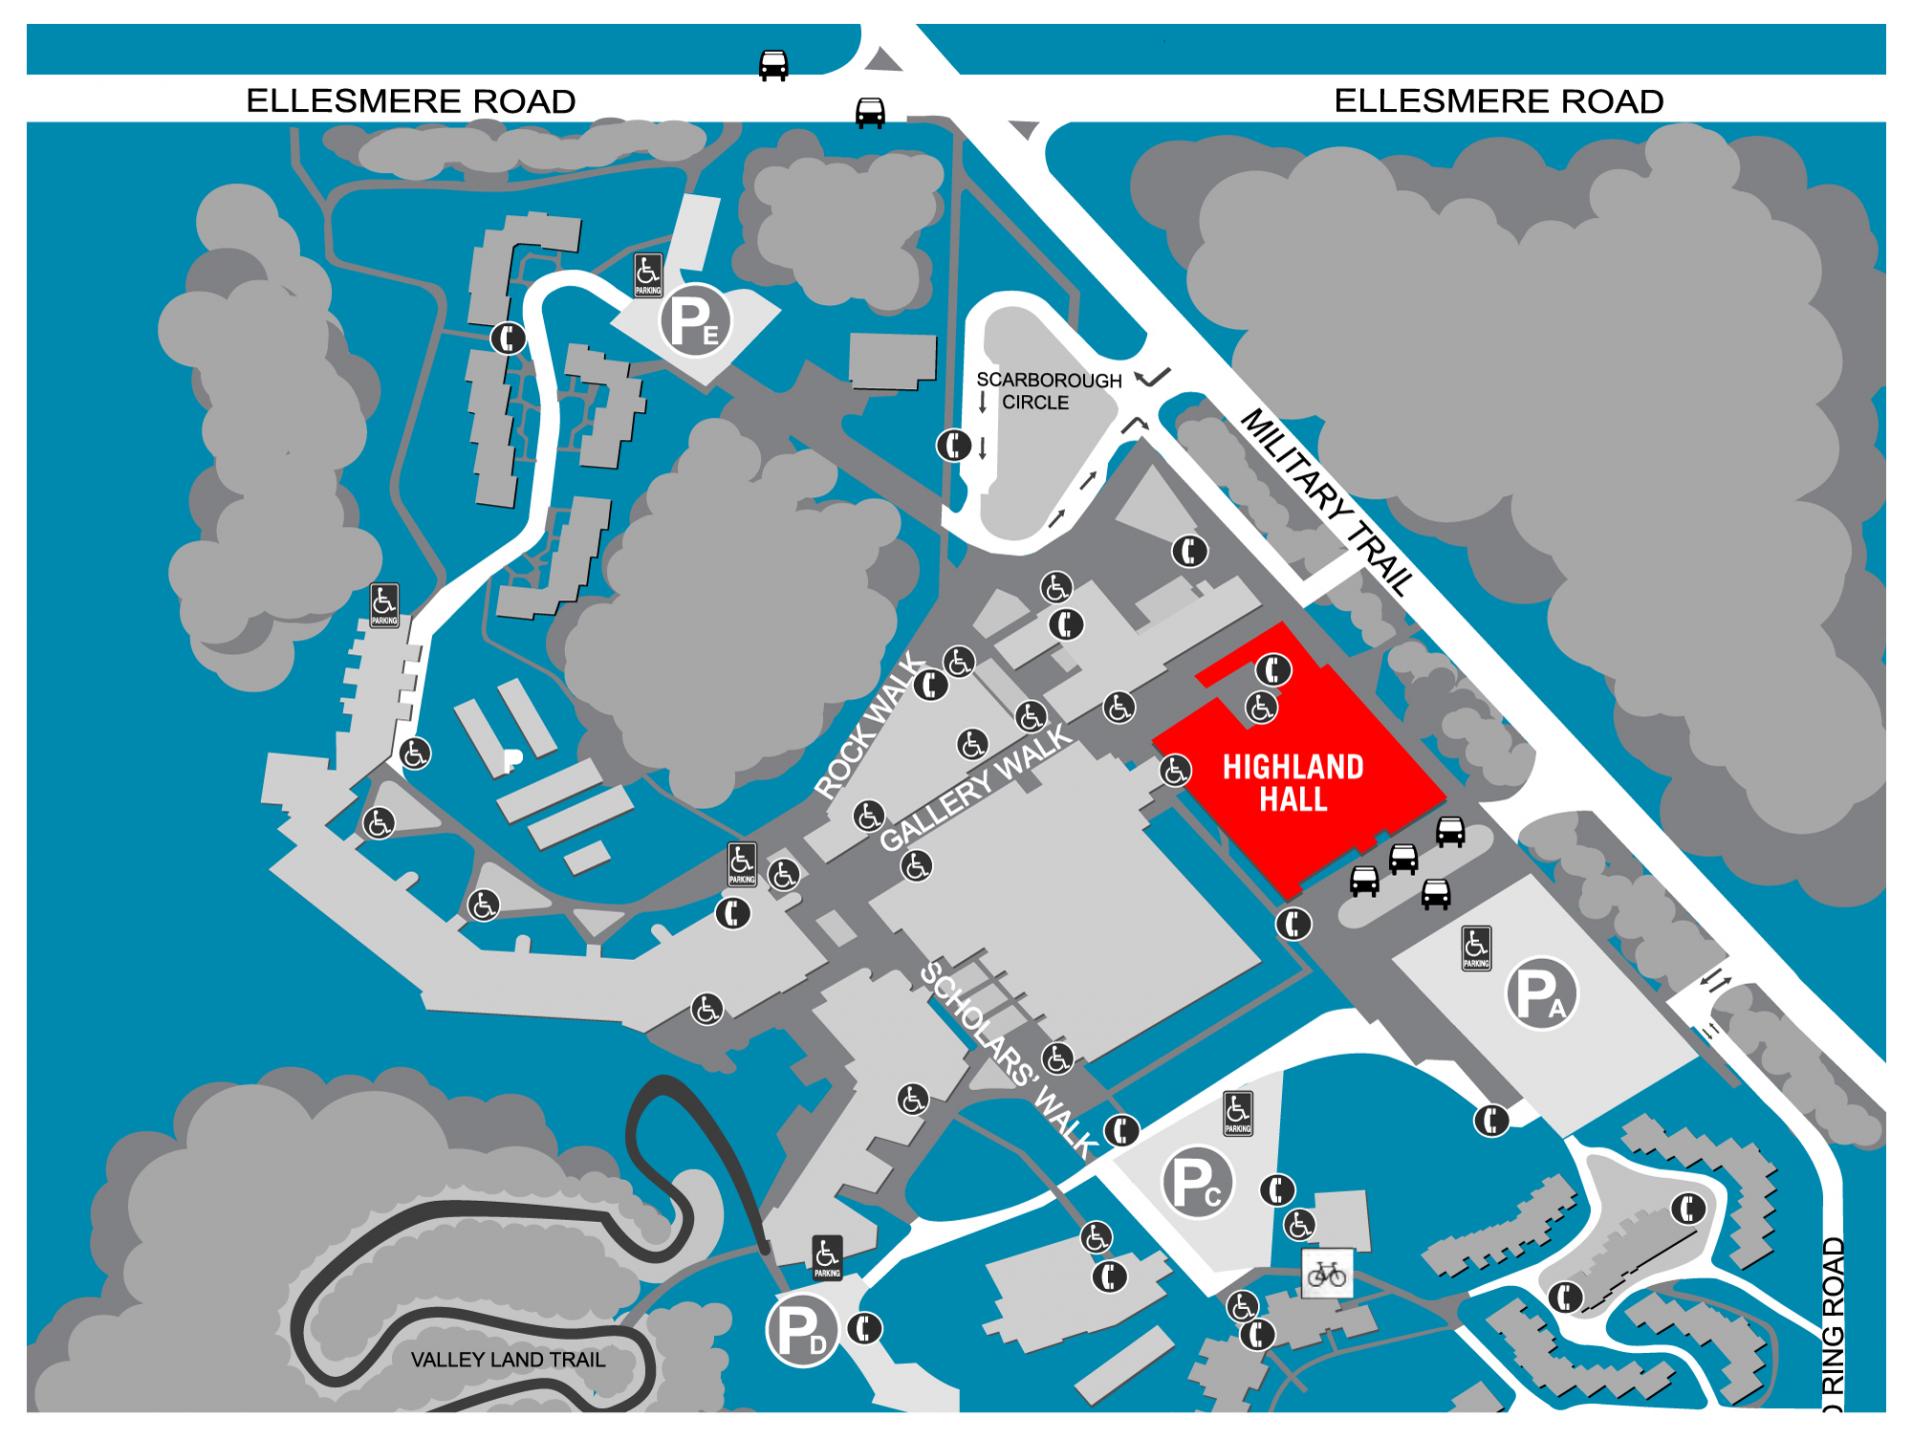 Venue and link to the map